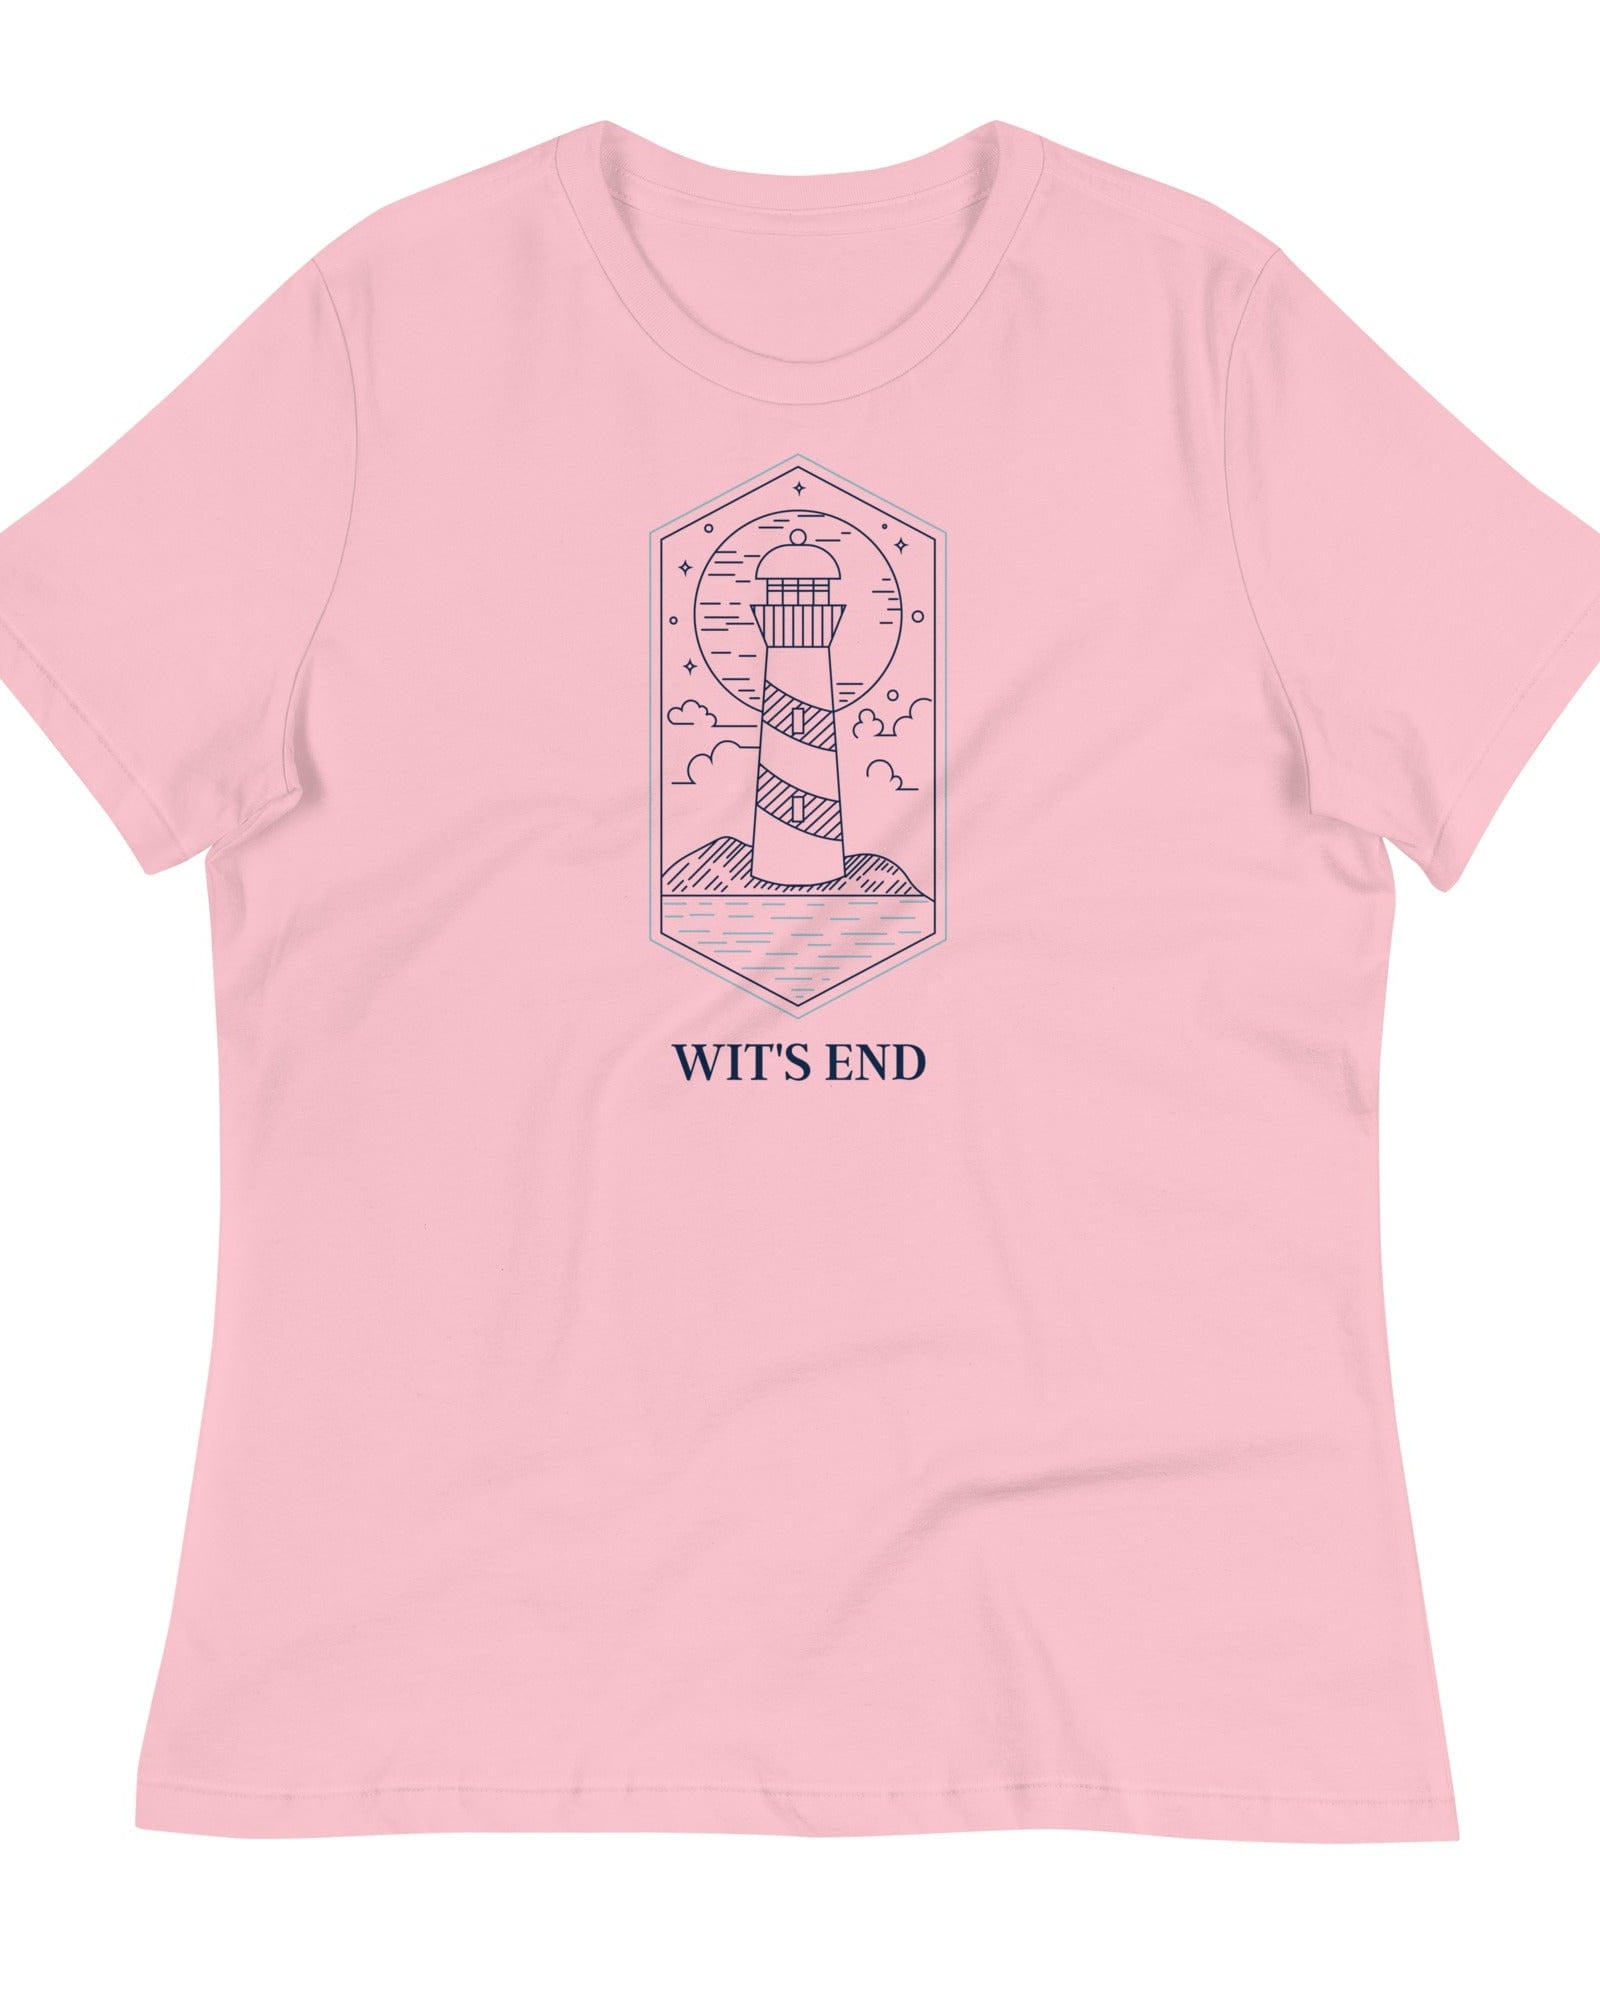 Wit's End | Women's Relaxed T-Shirt Pink / S Shirts & Tops Jolly & Goode